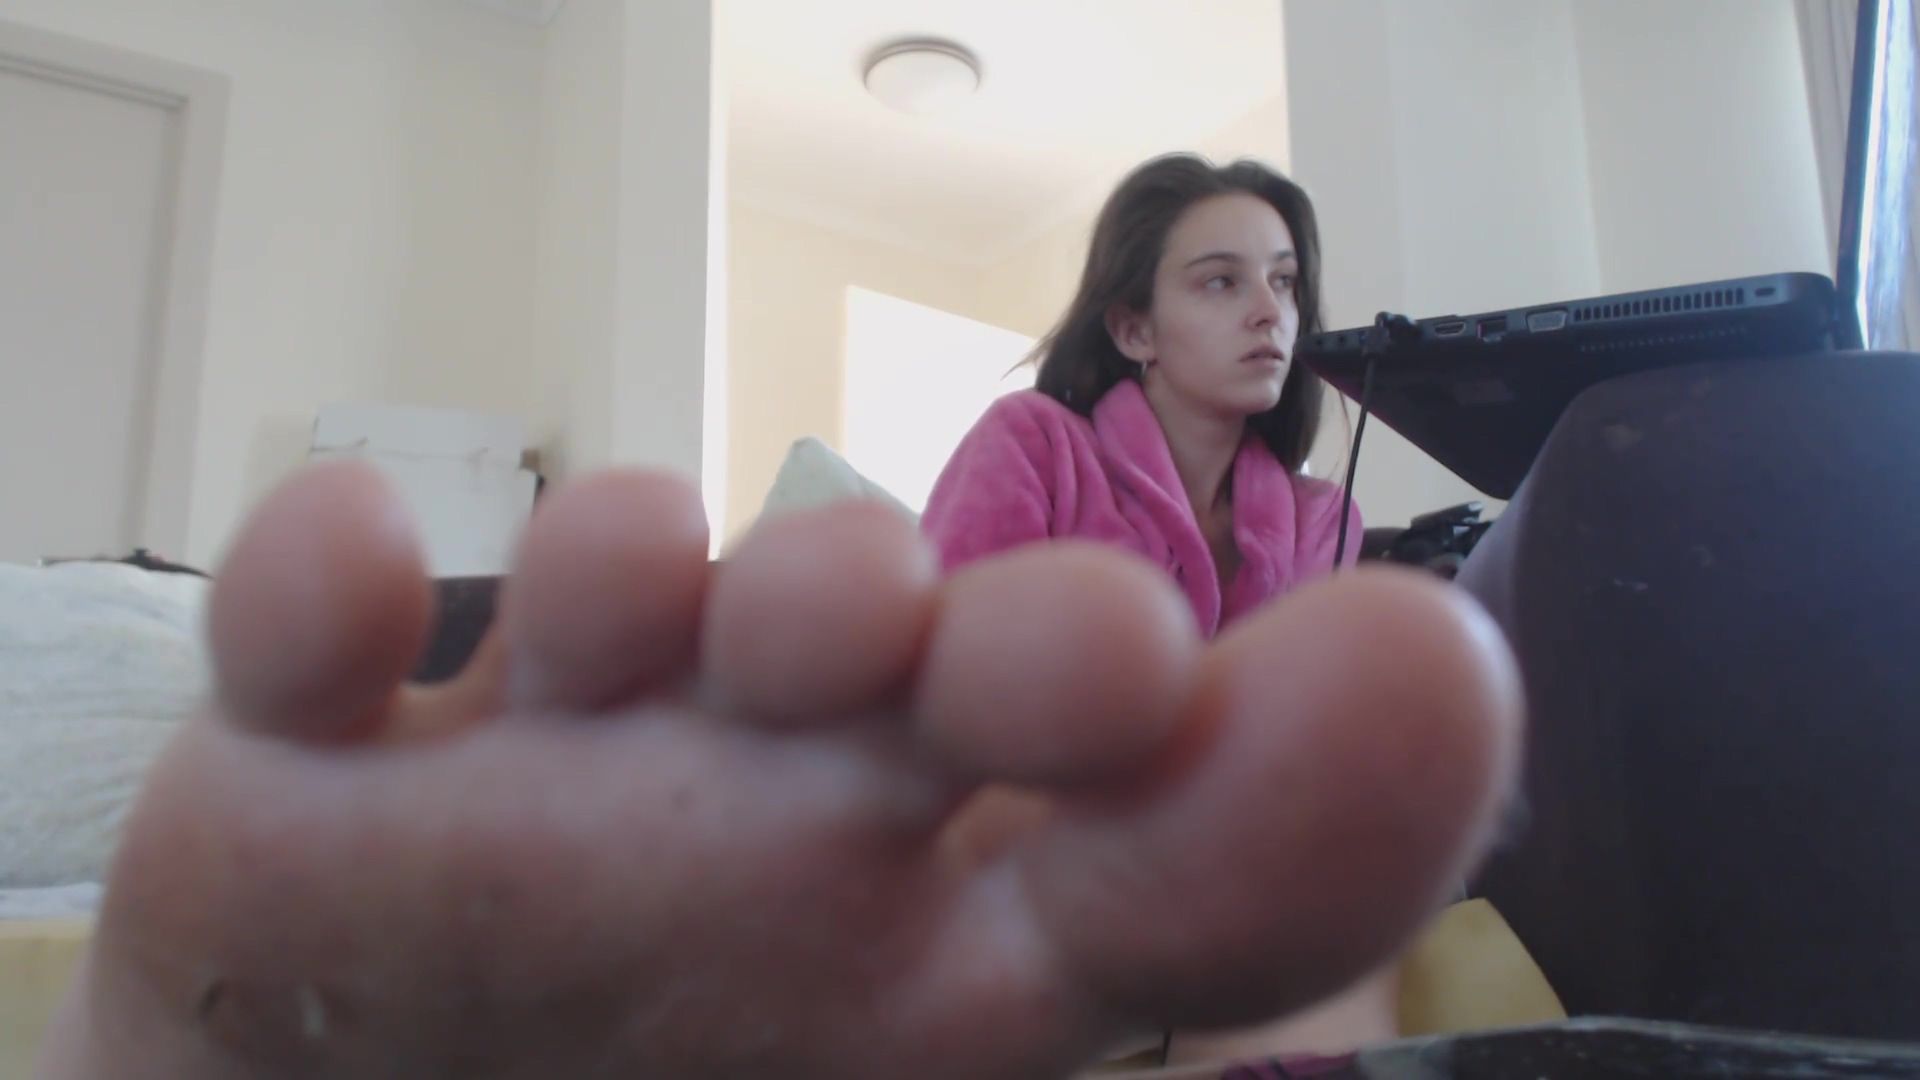 Women Fucking Sick Brunette Revealing Her Dirty Feet And Soles On Private Camera Omegle